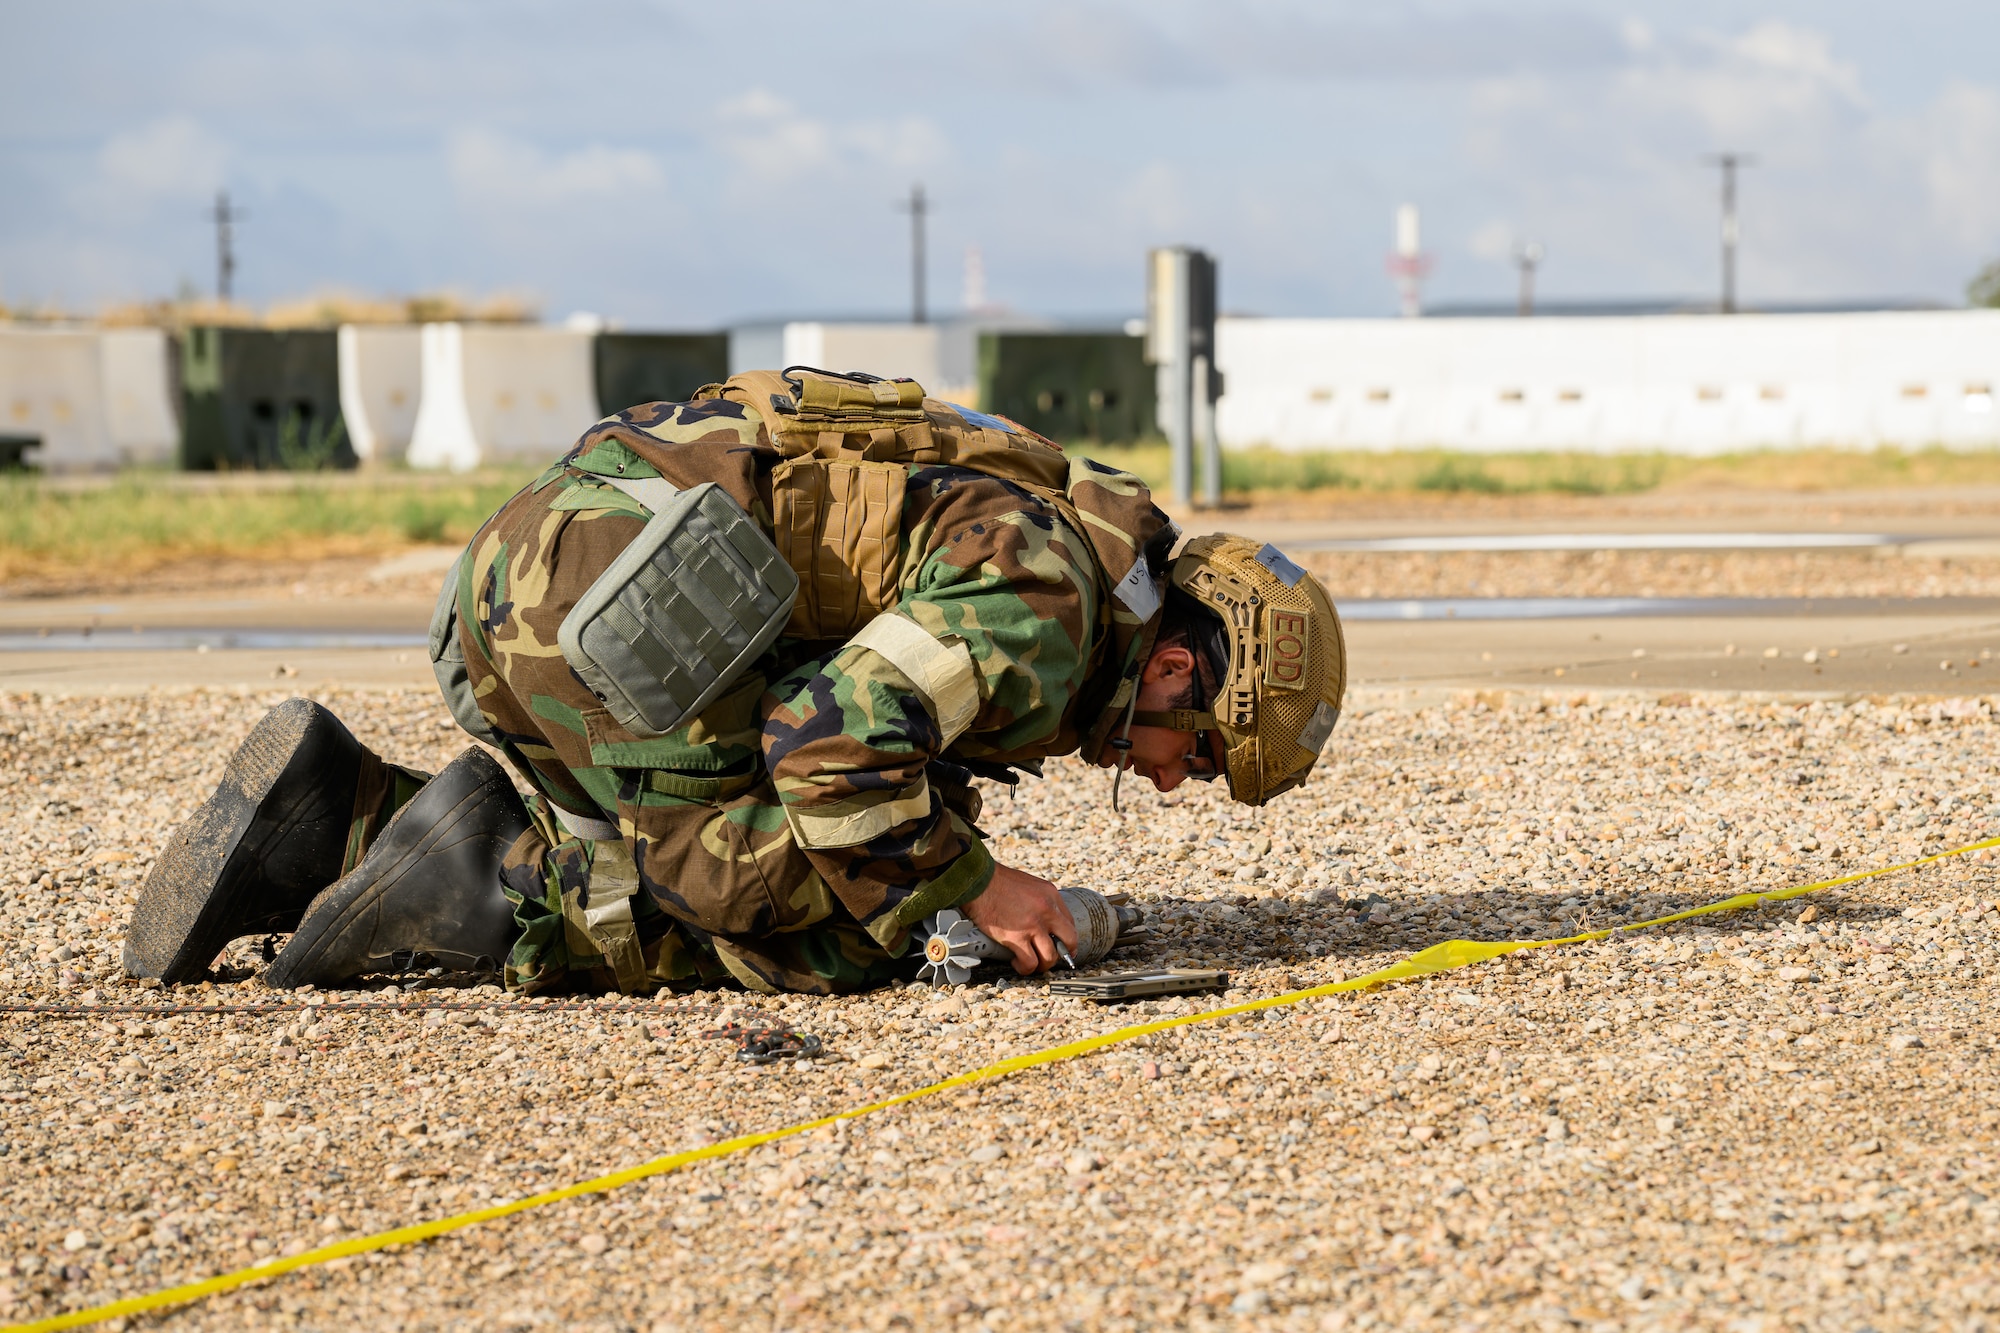 Staff Sgt. Kaleb Marquis, 775th Explosive Ordnance Flight, identifies unexploded ordnance during a Phase 2 exercise at Hill Air Force Base, Utah, Sept. 14, 2022.